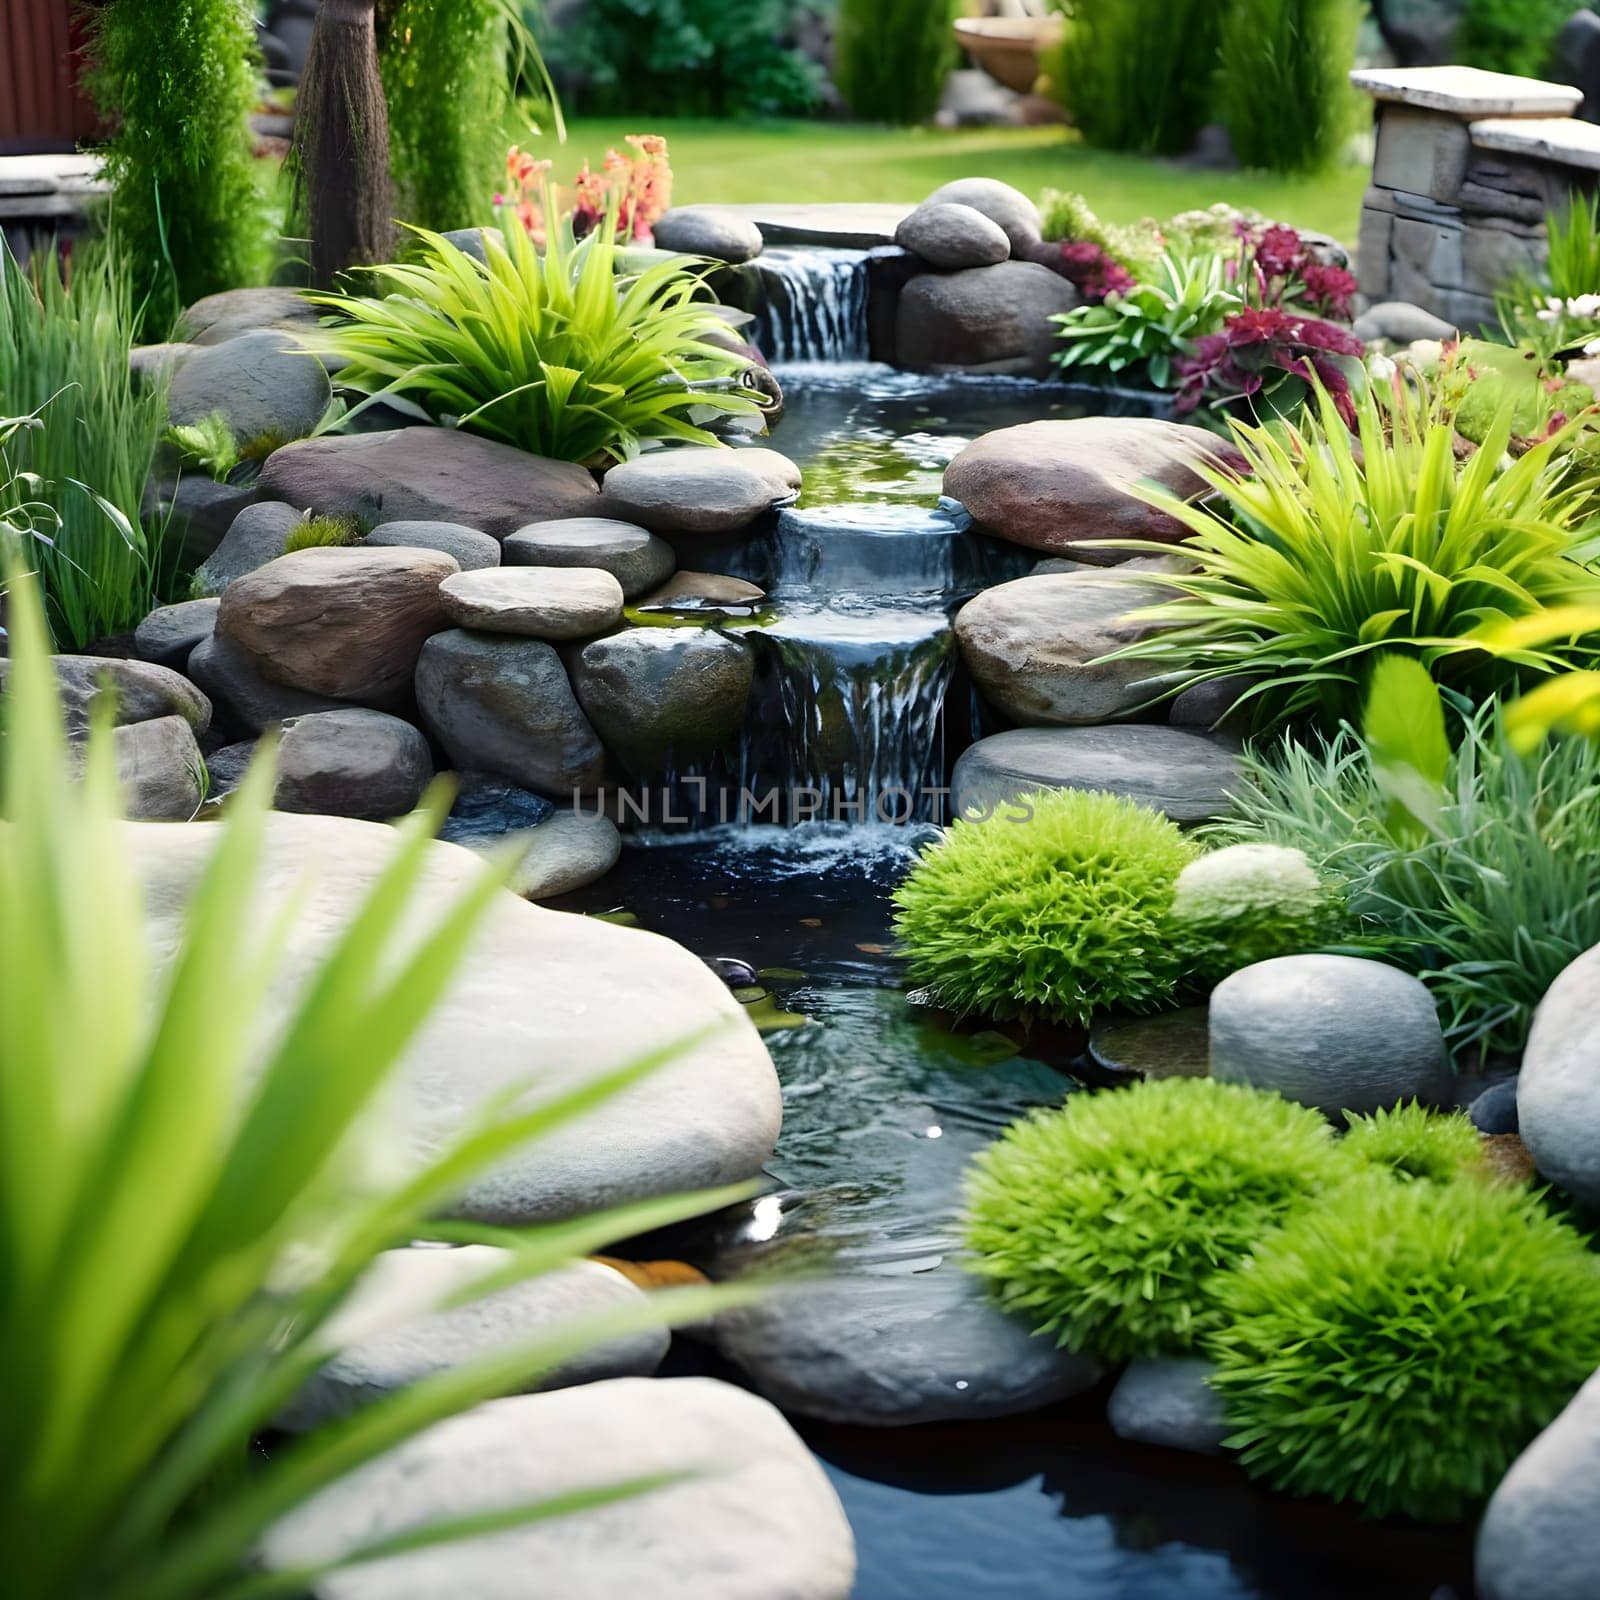 Summer Sanctuary: Luxury Backyard Retreat with Water Features by Petrichor